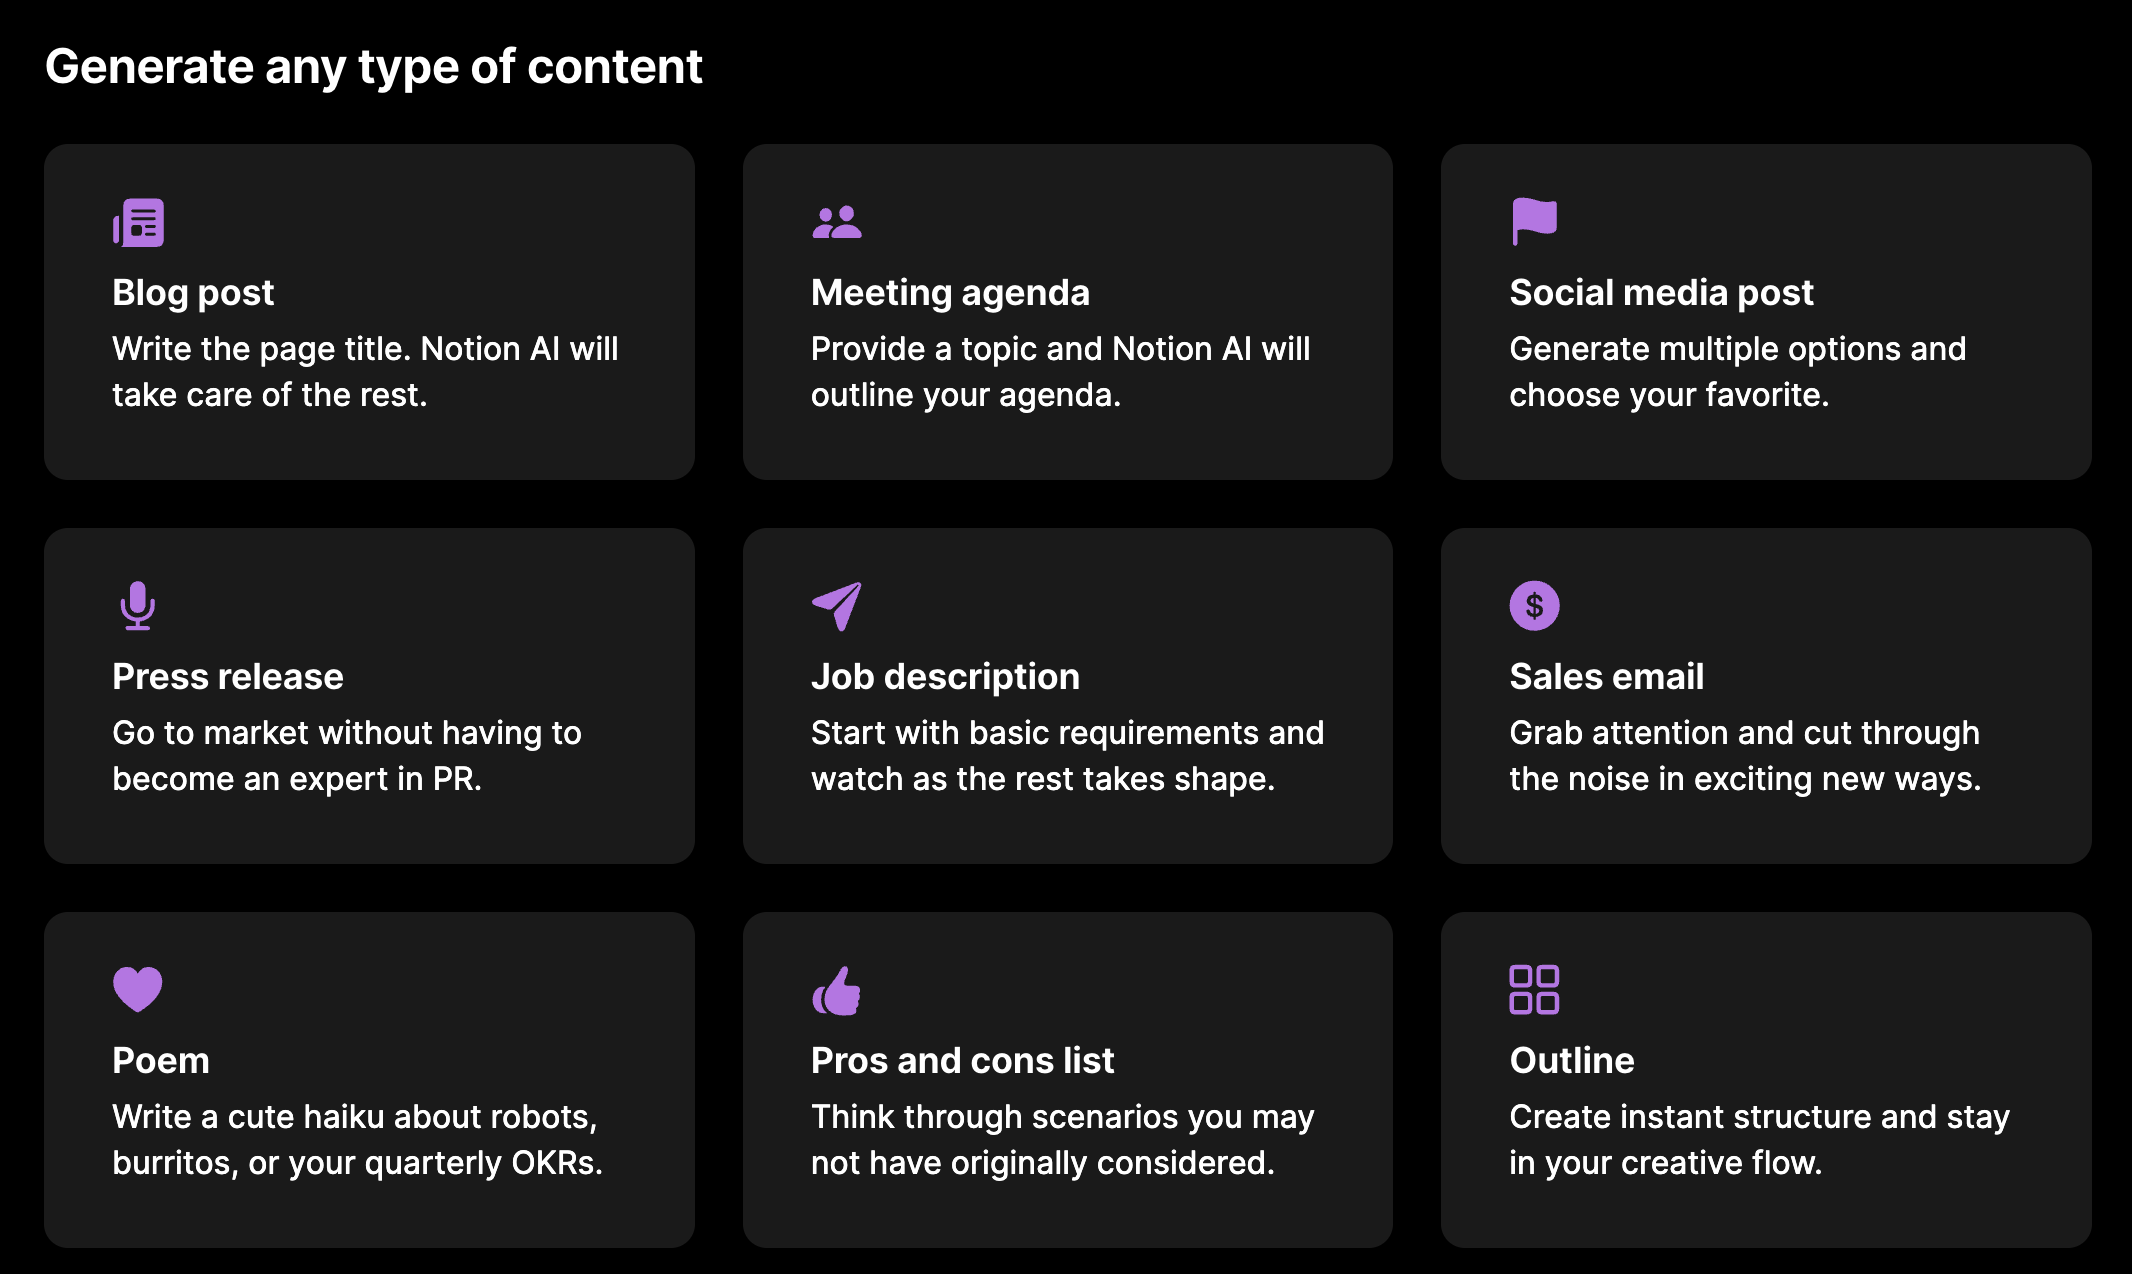 A list of some of the features available in the alpha of Notion AI - Blog post, meeting agenda, social media post, press release, job description, sales email, poem, pros and cons list, outline